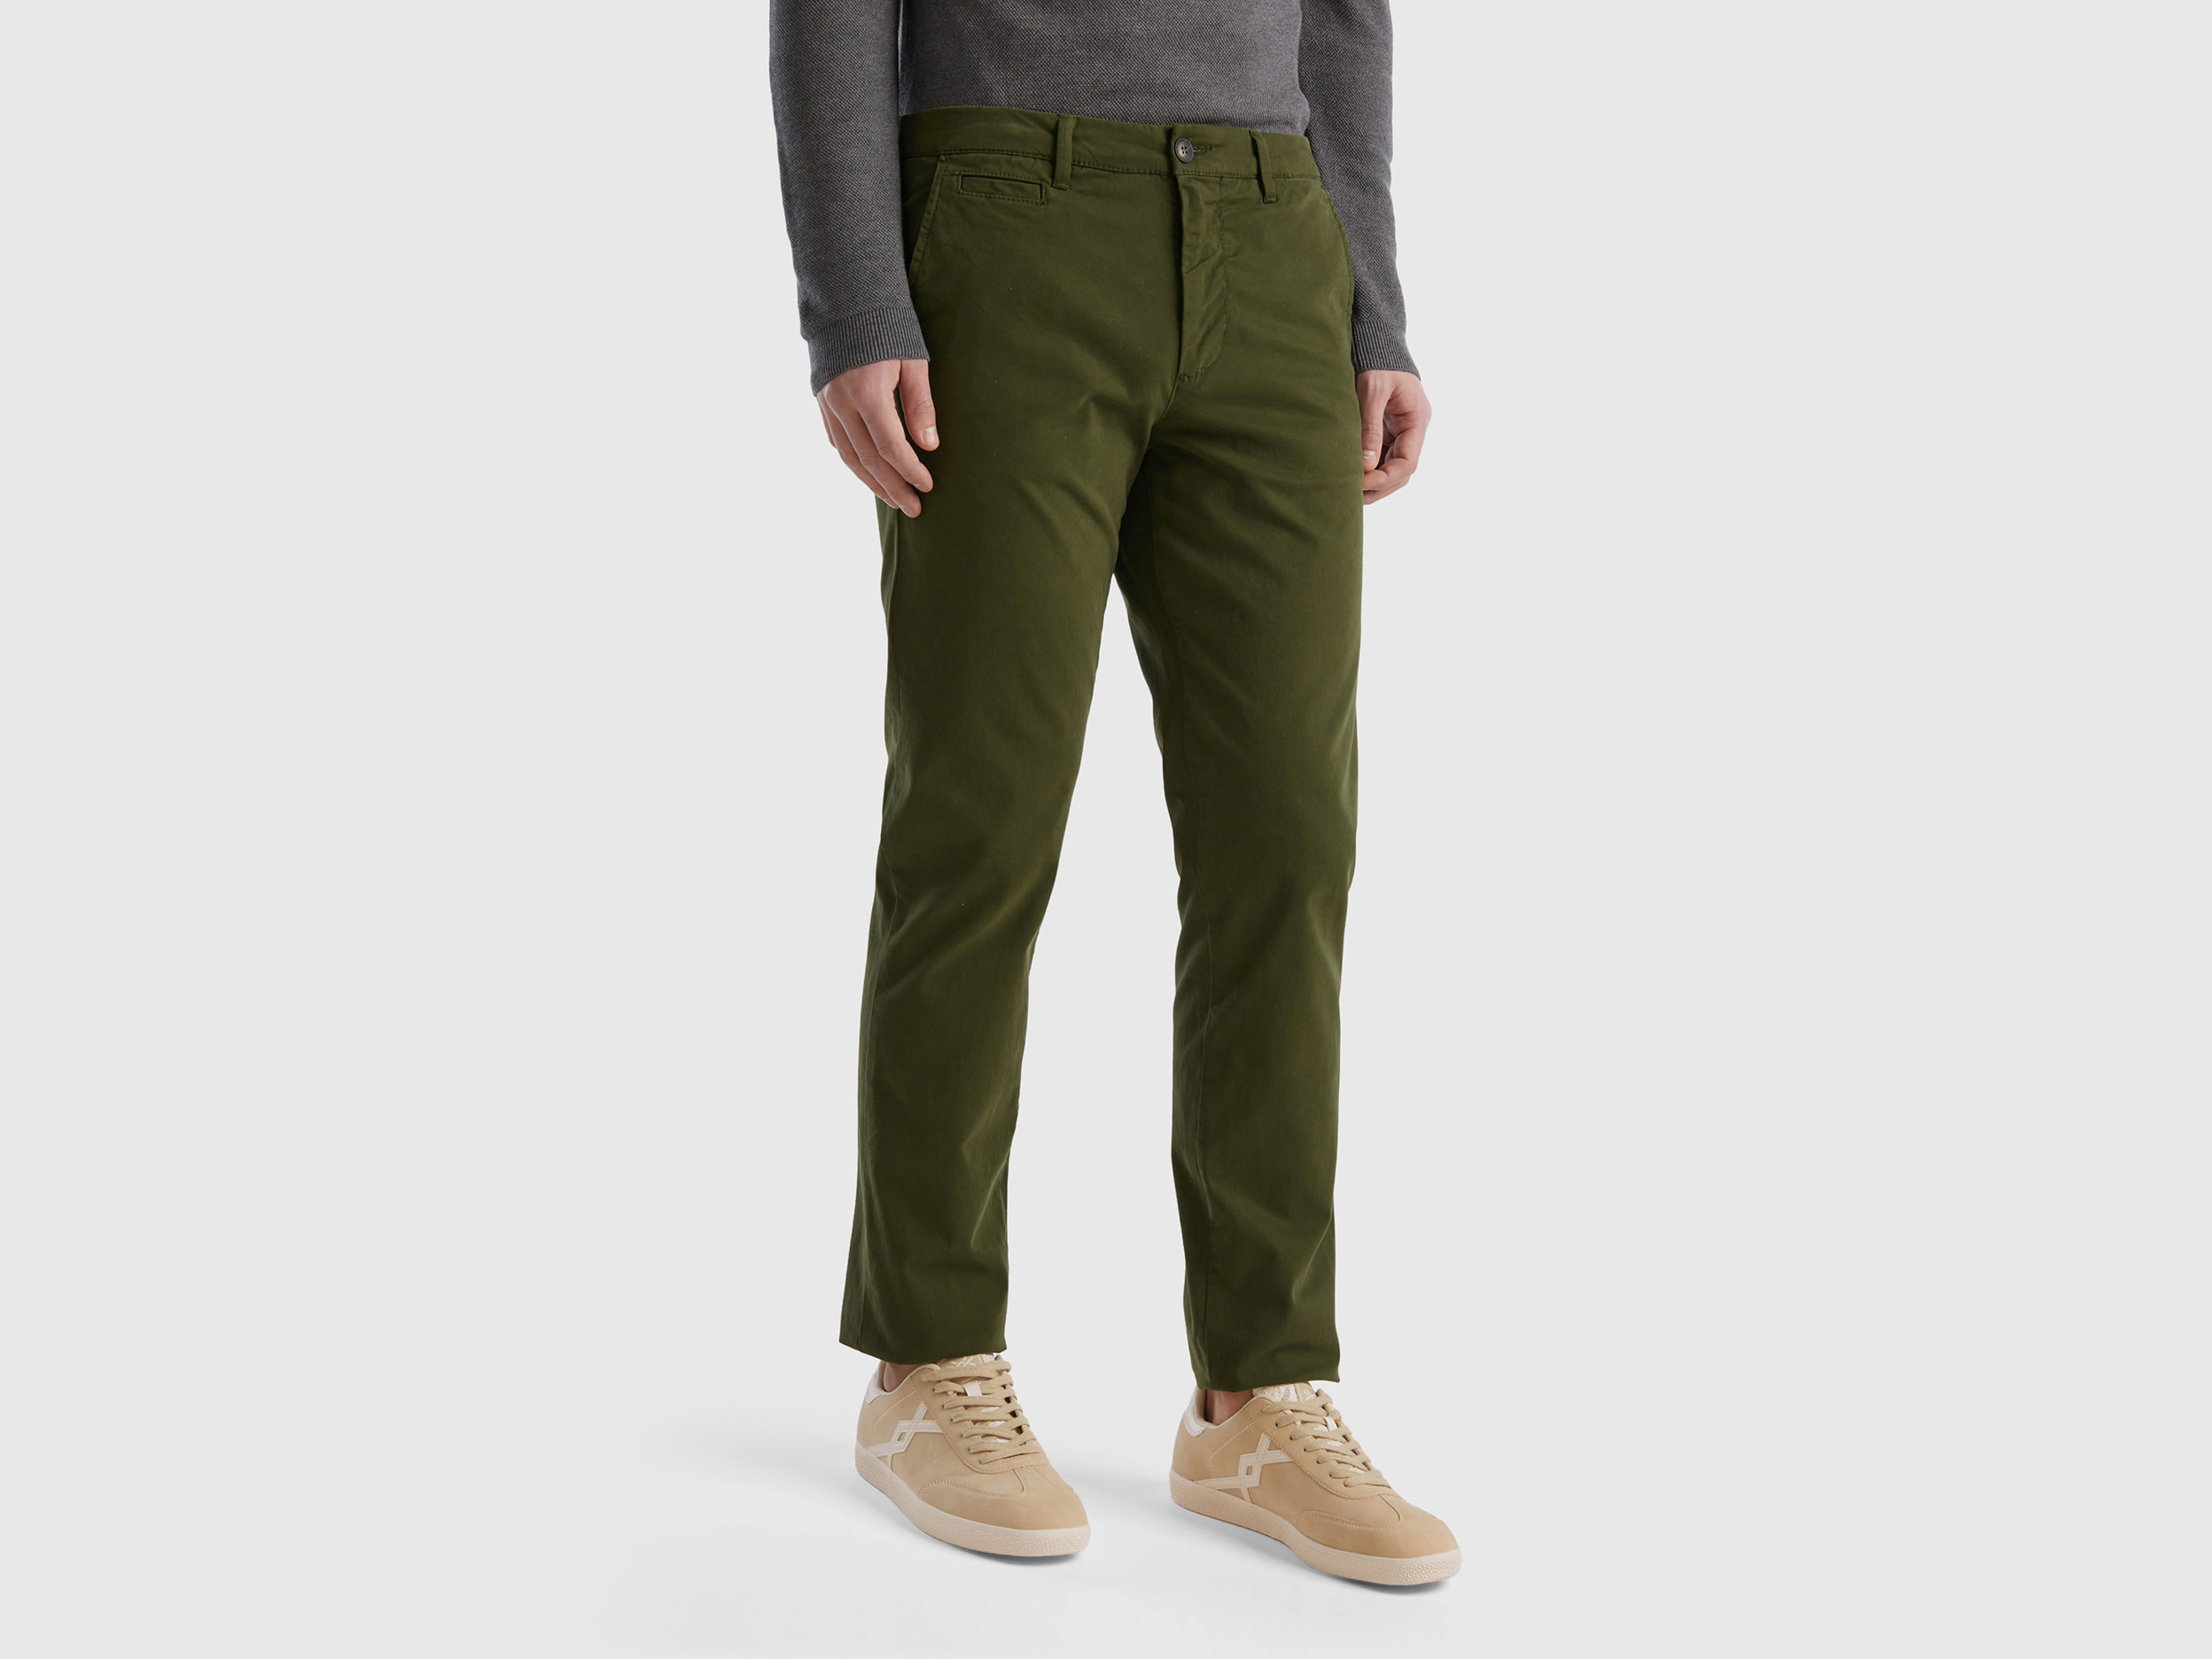 Benetton, Olive Green Slim Fit Chinos, size 44, , Men